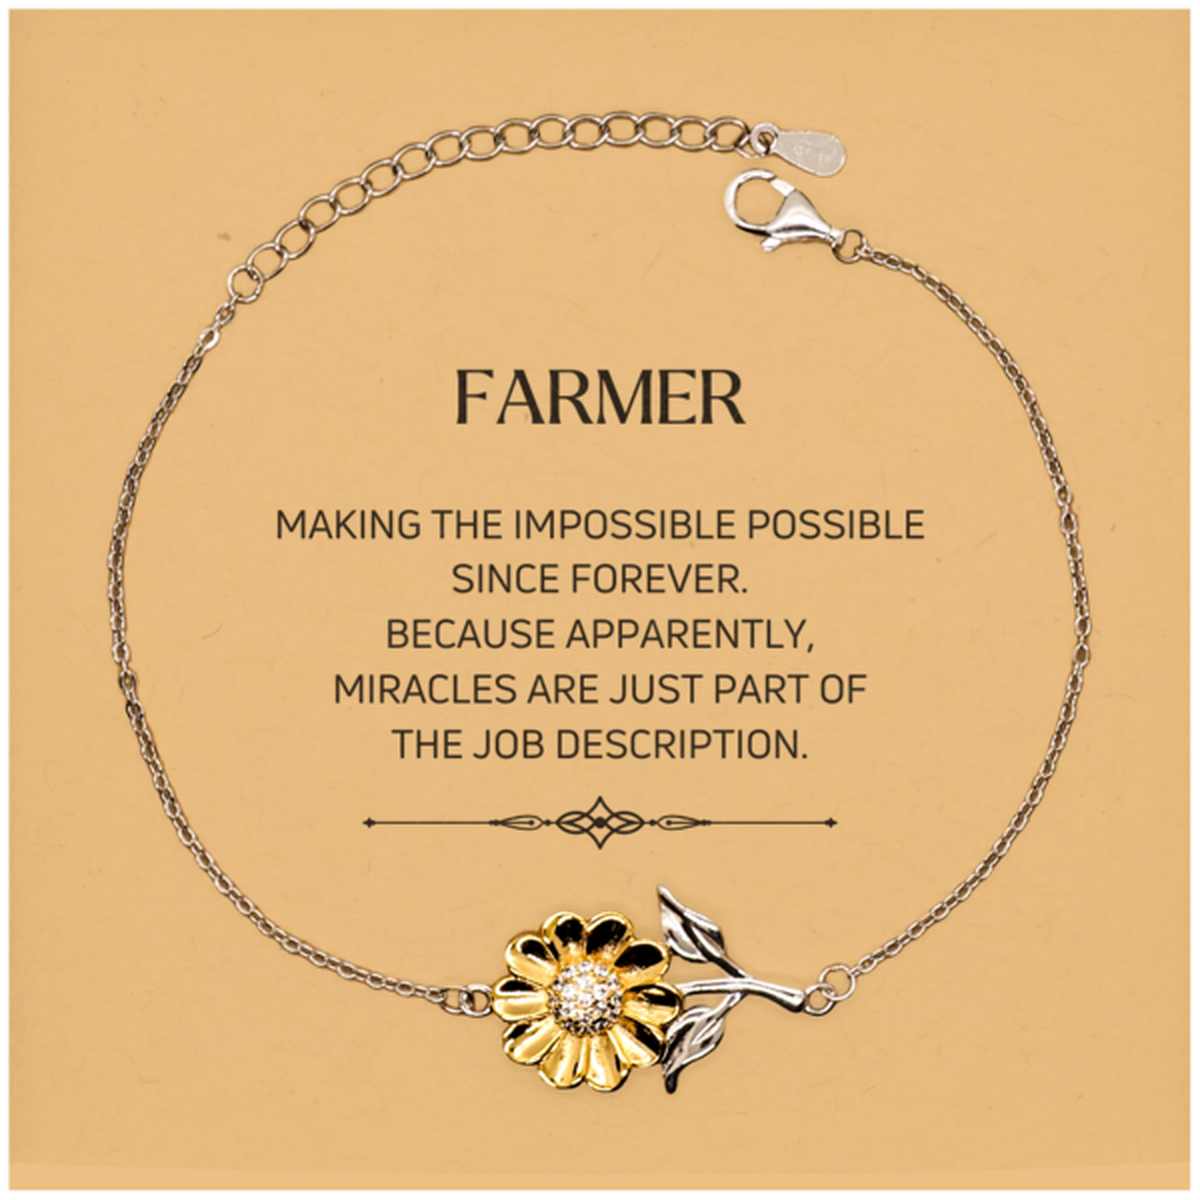 Funny Farmer Gifts, Miracles are just part of the job description, Inspirational Birthday Christmas Sunflower Bracelet For Farmer, Men, Women, Coworkers, Friends, Boss